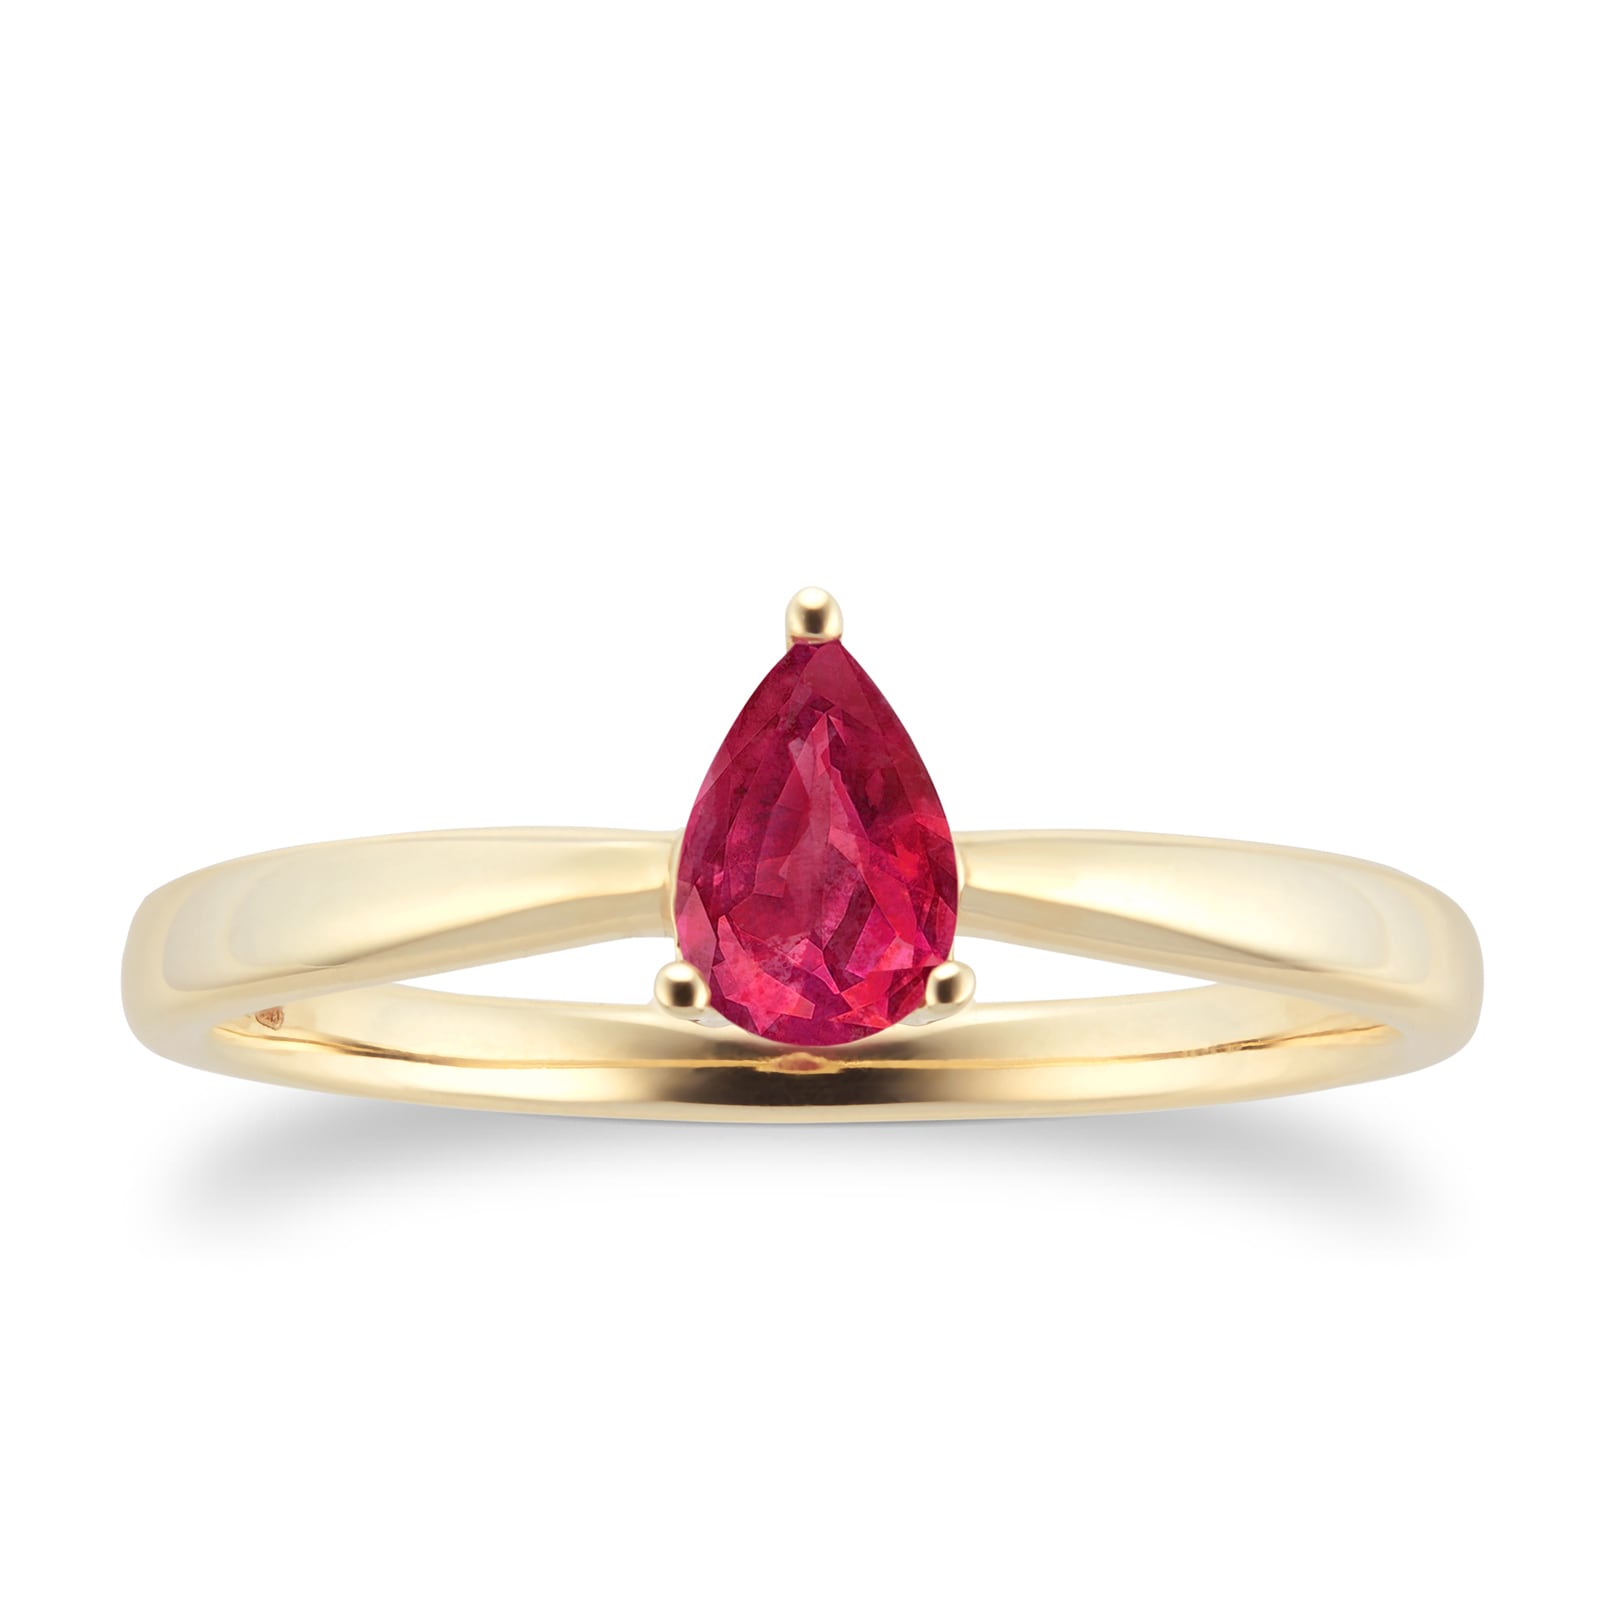 9ct Yellow Gold 4 Claw Pear Cut Ruby Ring